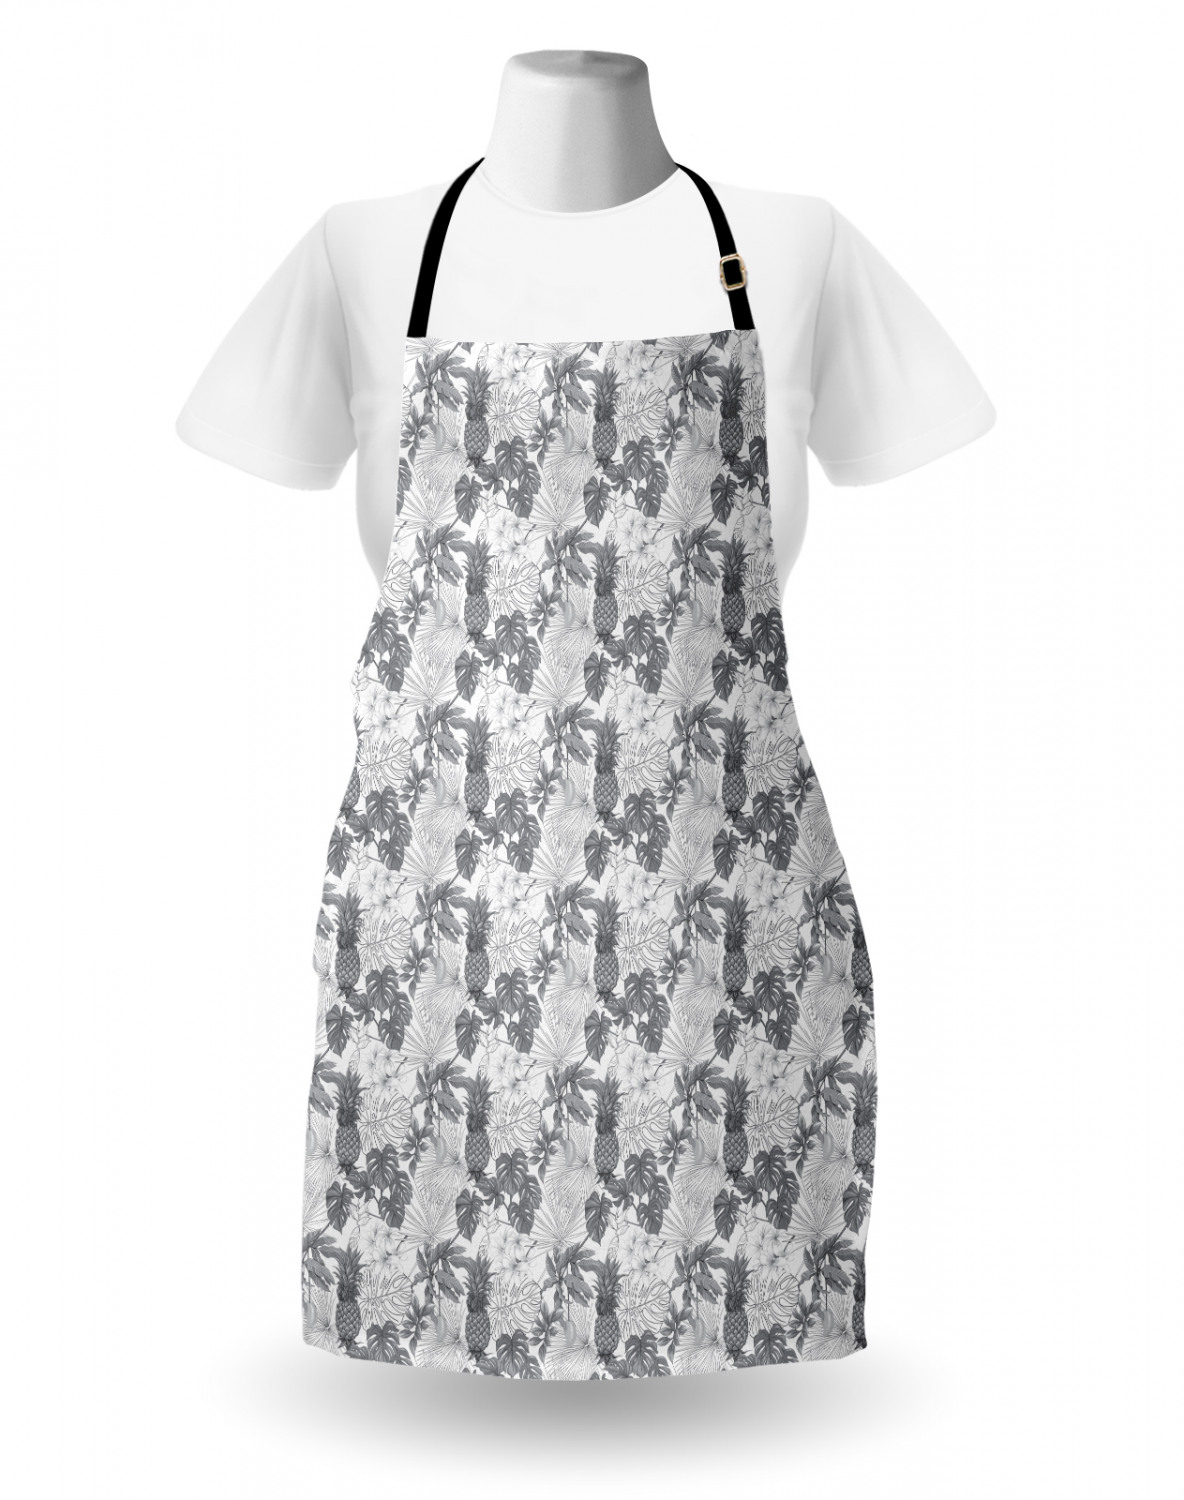 Details about   Ambesonne Apron with Adjustable Neck Strap for Garden Cooking Standard Size 